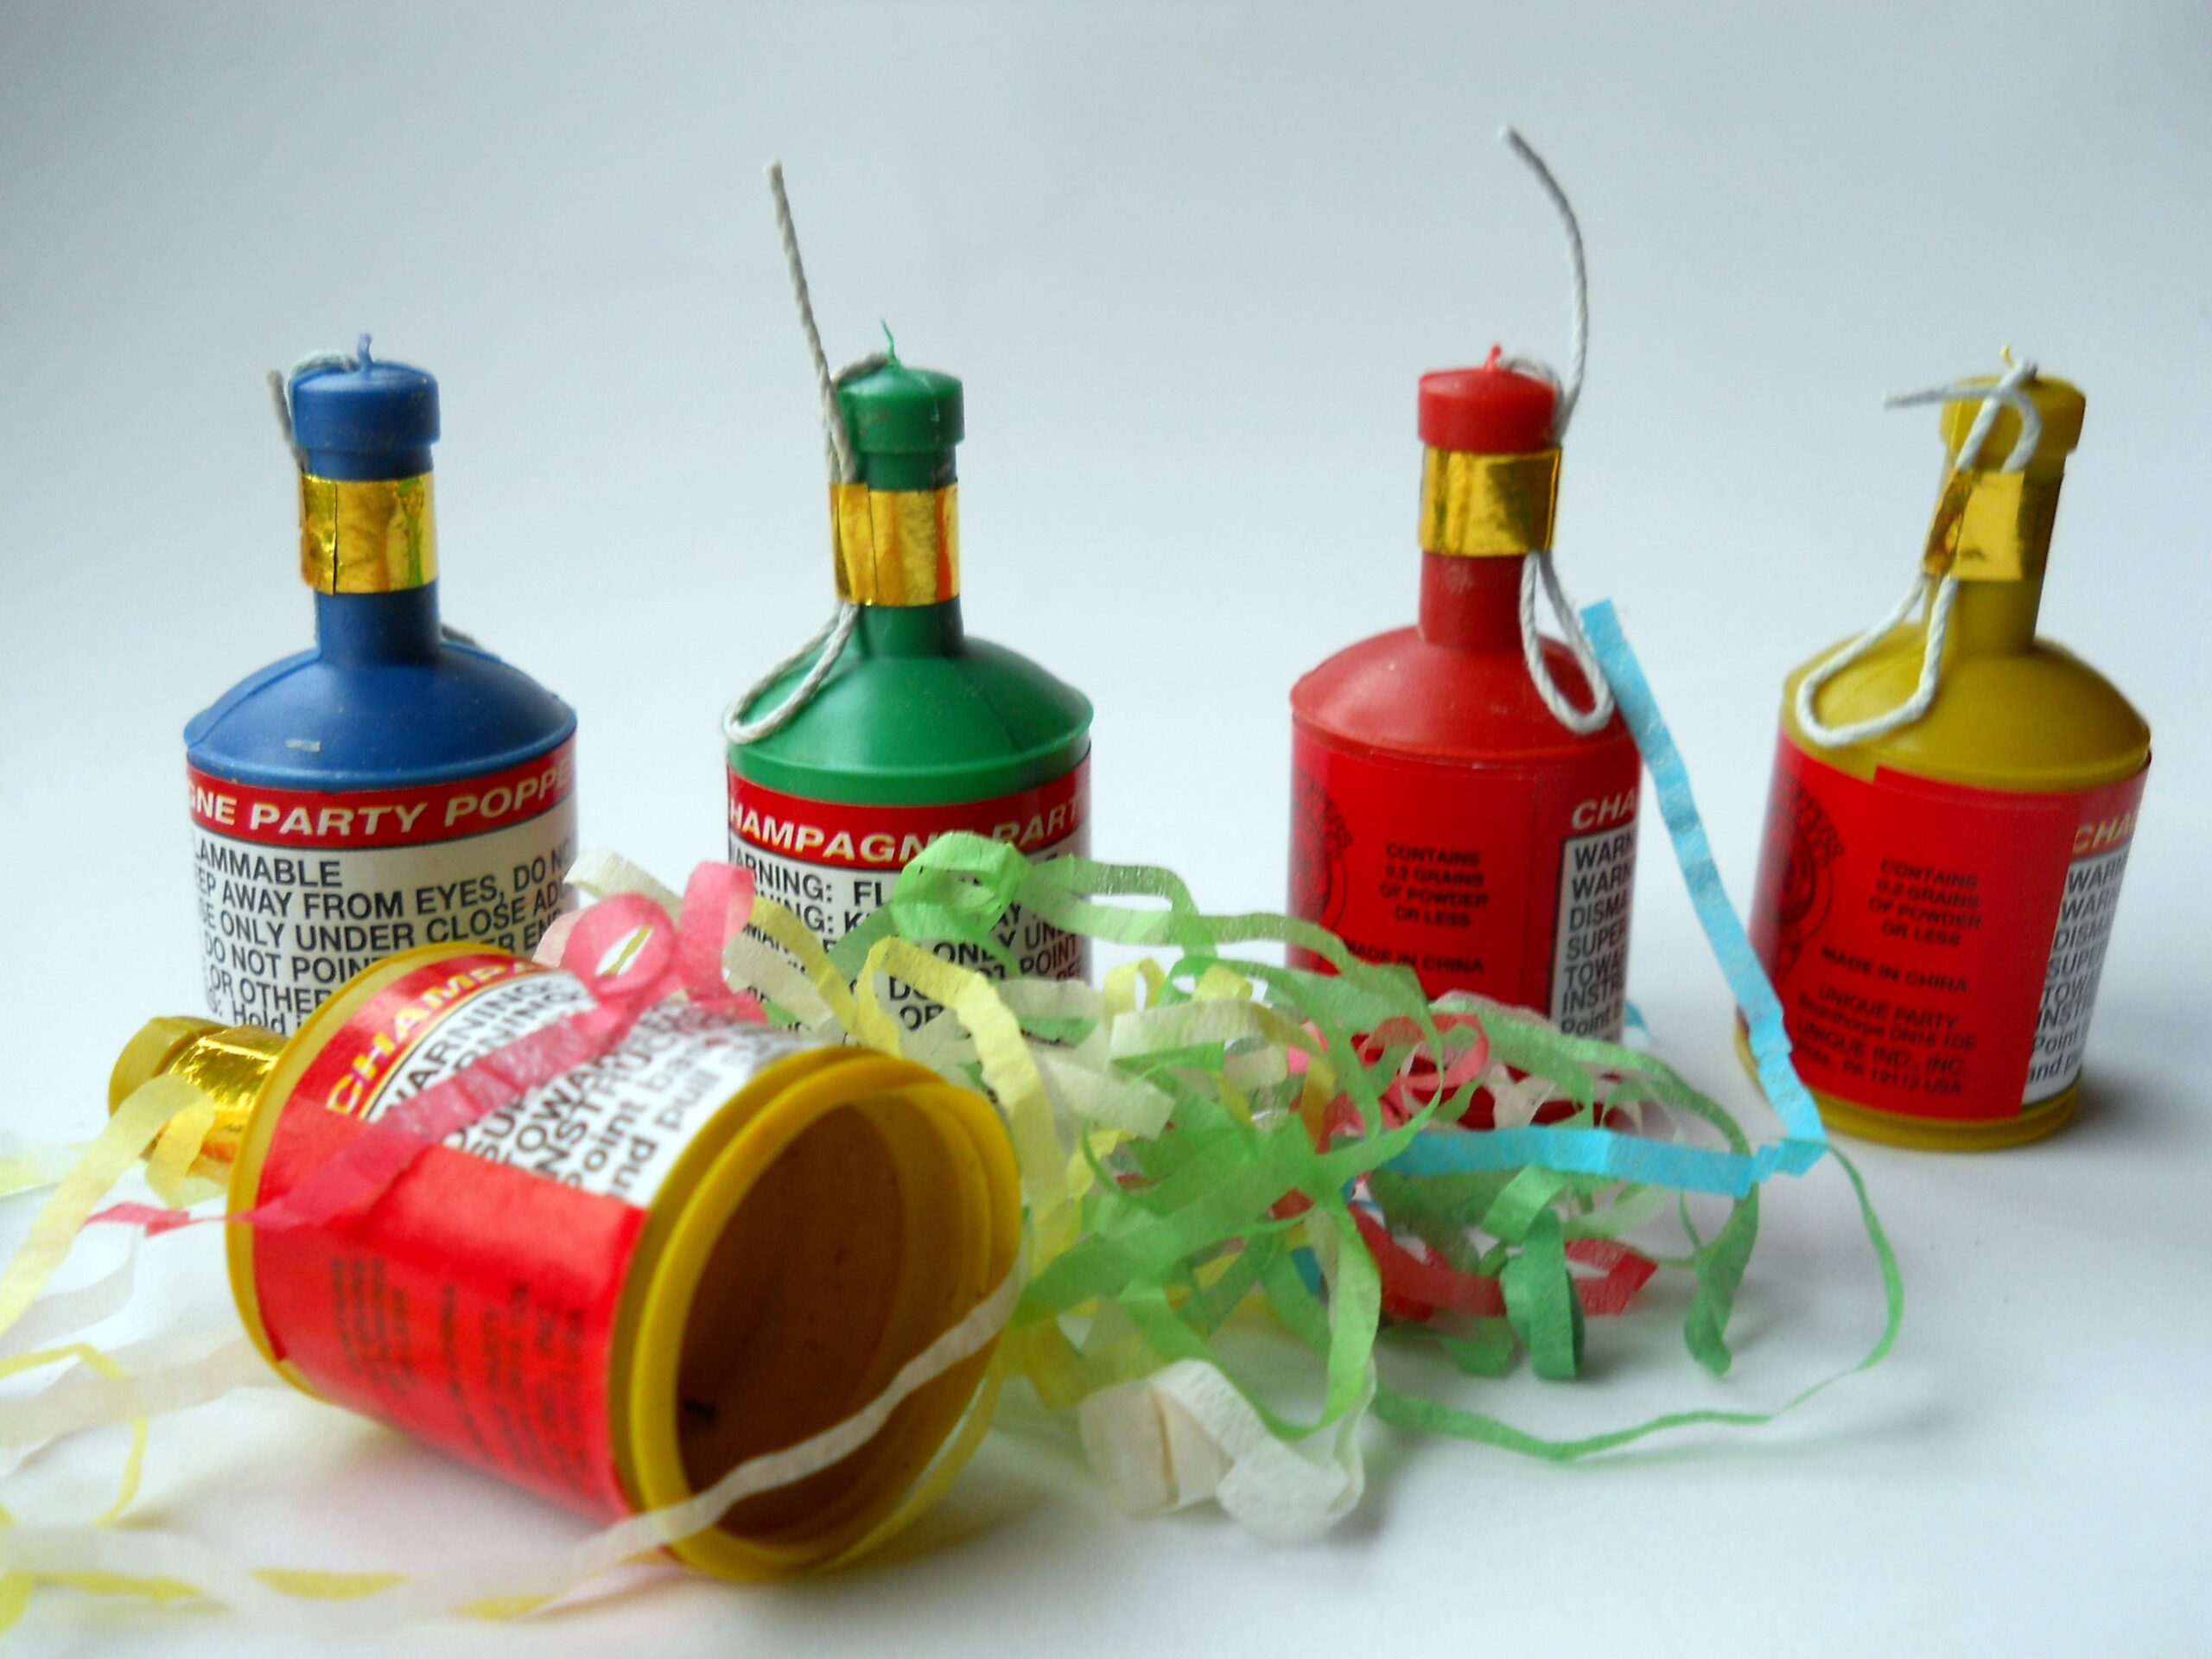 Australian birthday Traditions - Party Poppers and Silly String